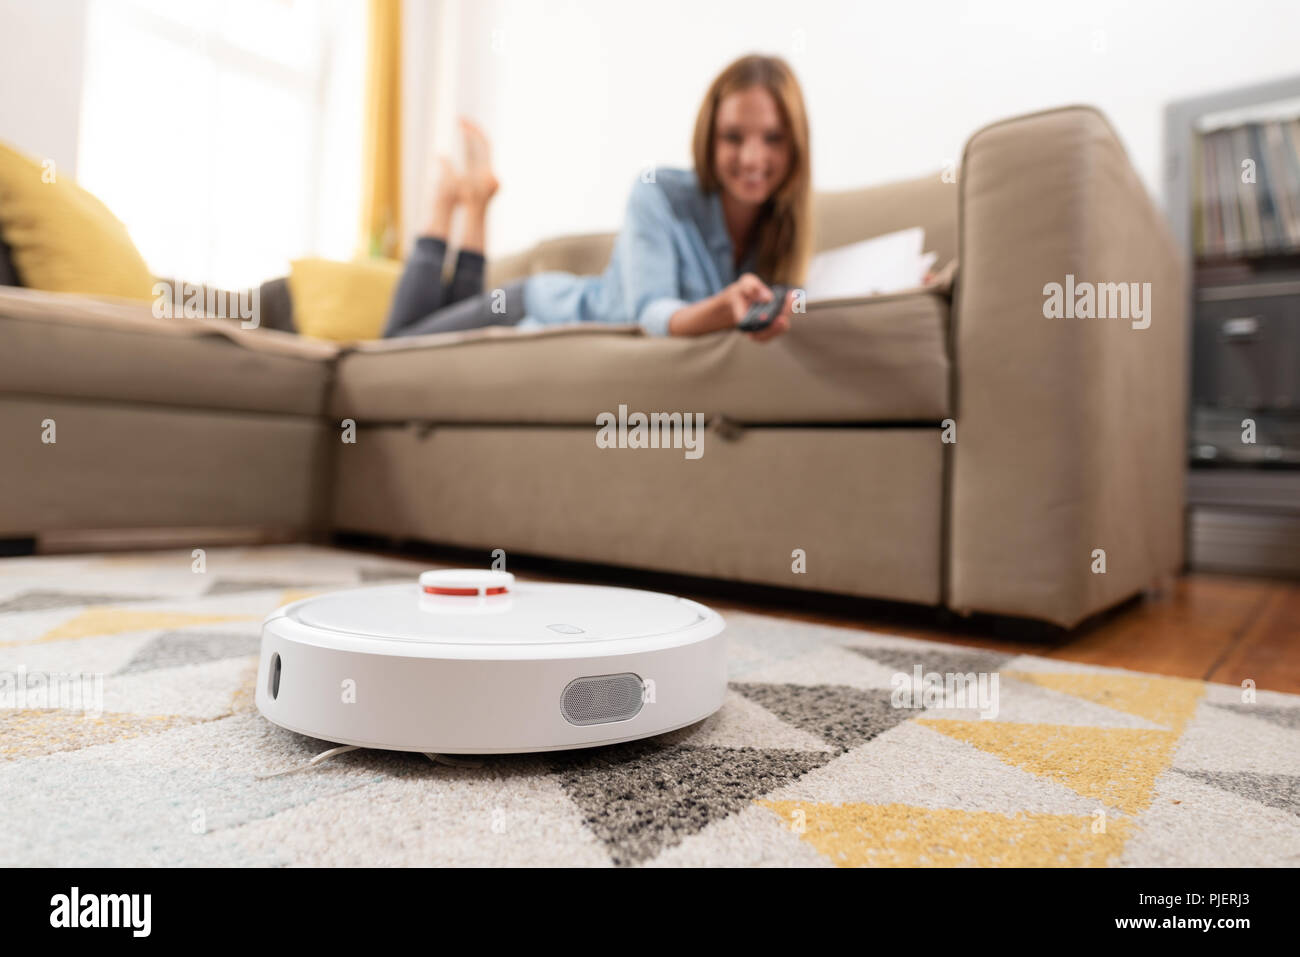 Robotic vacuum cleaner cleaning the room while woman relaxing on sofa. Woman controlling vacuum with remote control. Stock Photo